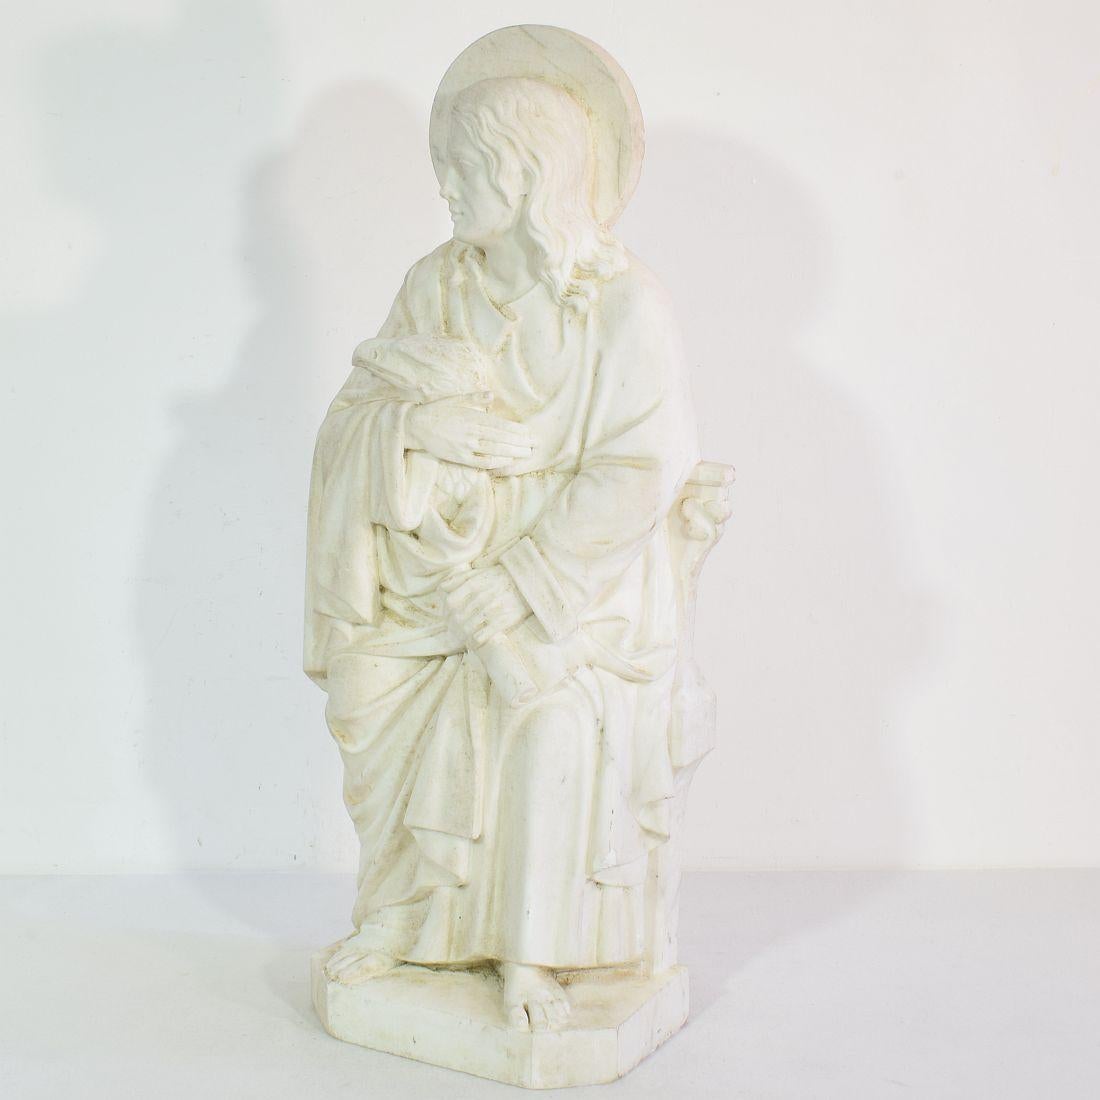 Beautiful weathered white marble statue representing Saint John the Evangelist.

Christian tradition says that John the Evangelist was John the Apostle. The Apostle John was one of the 